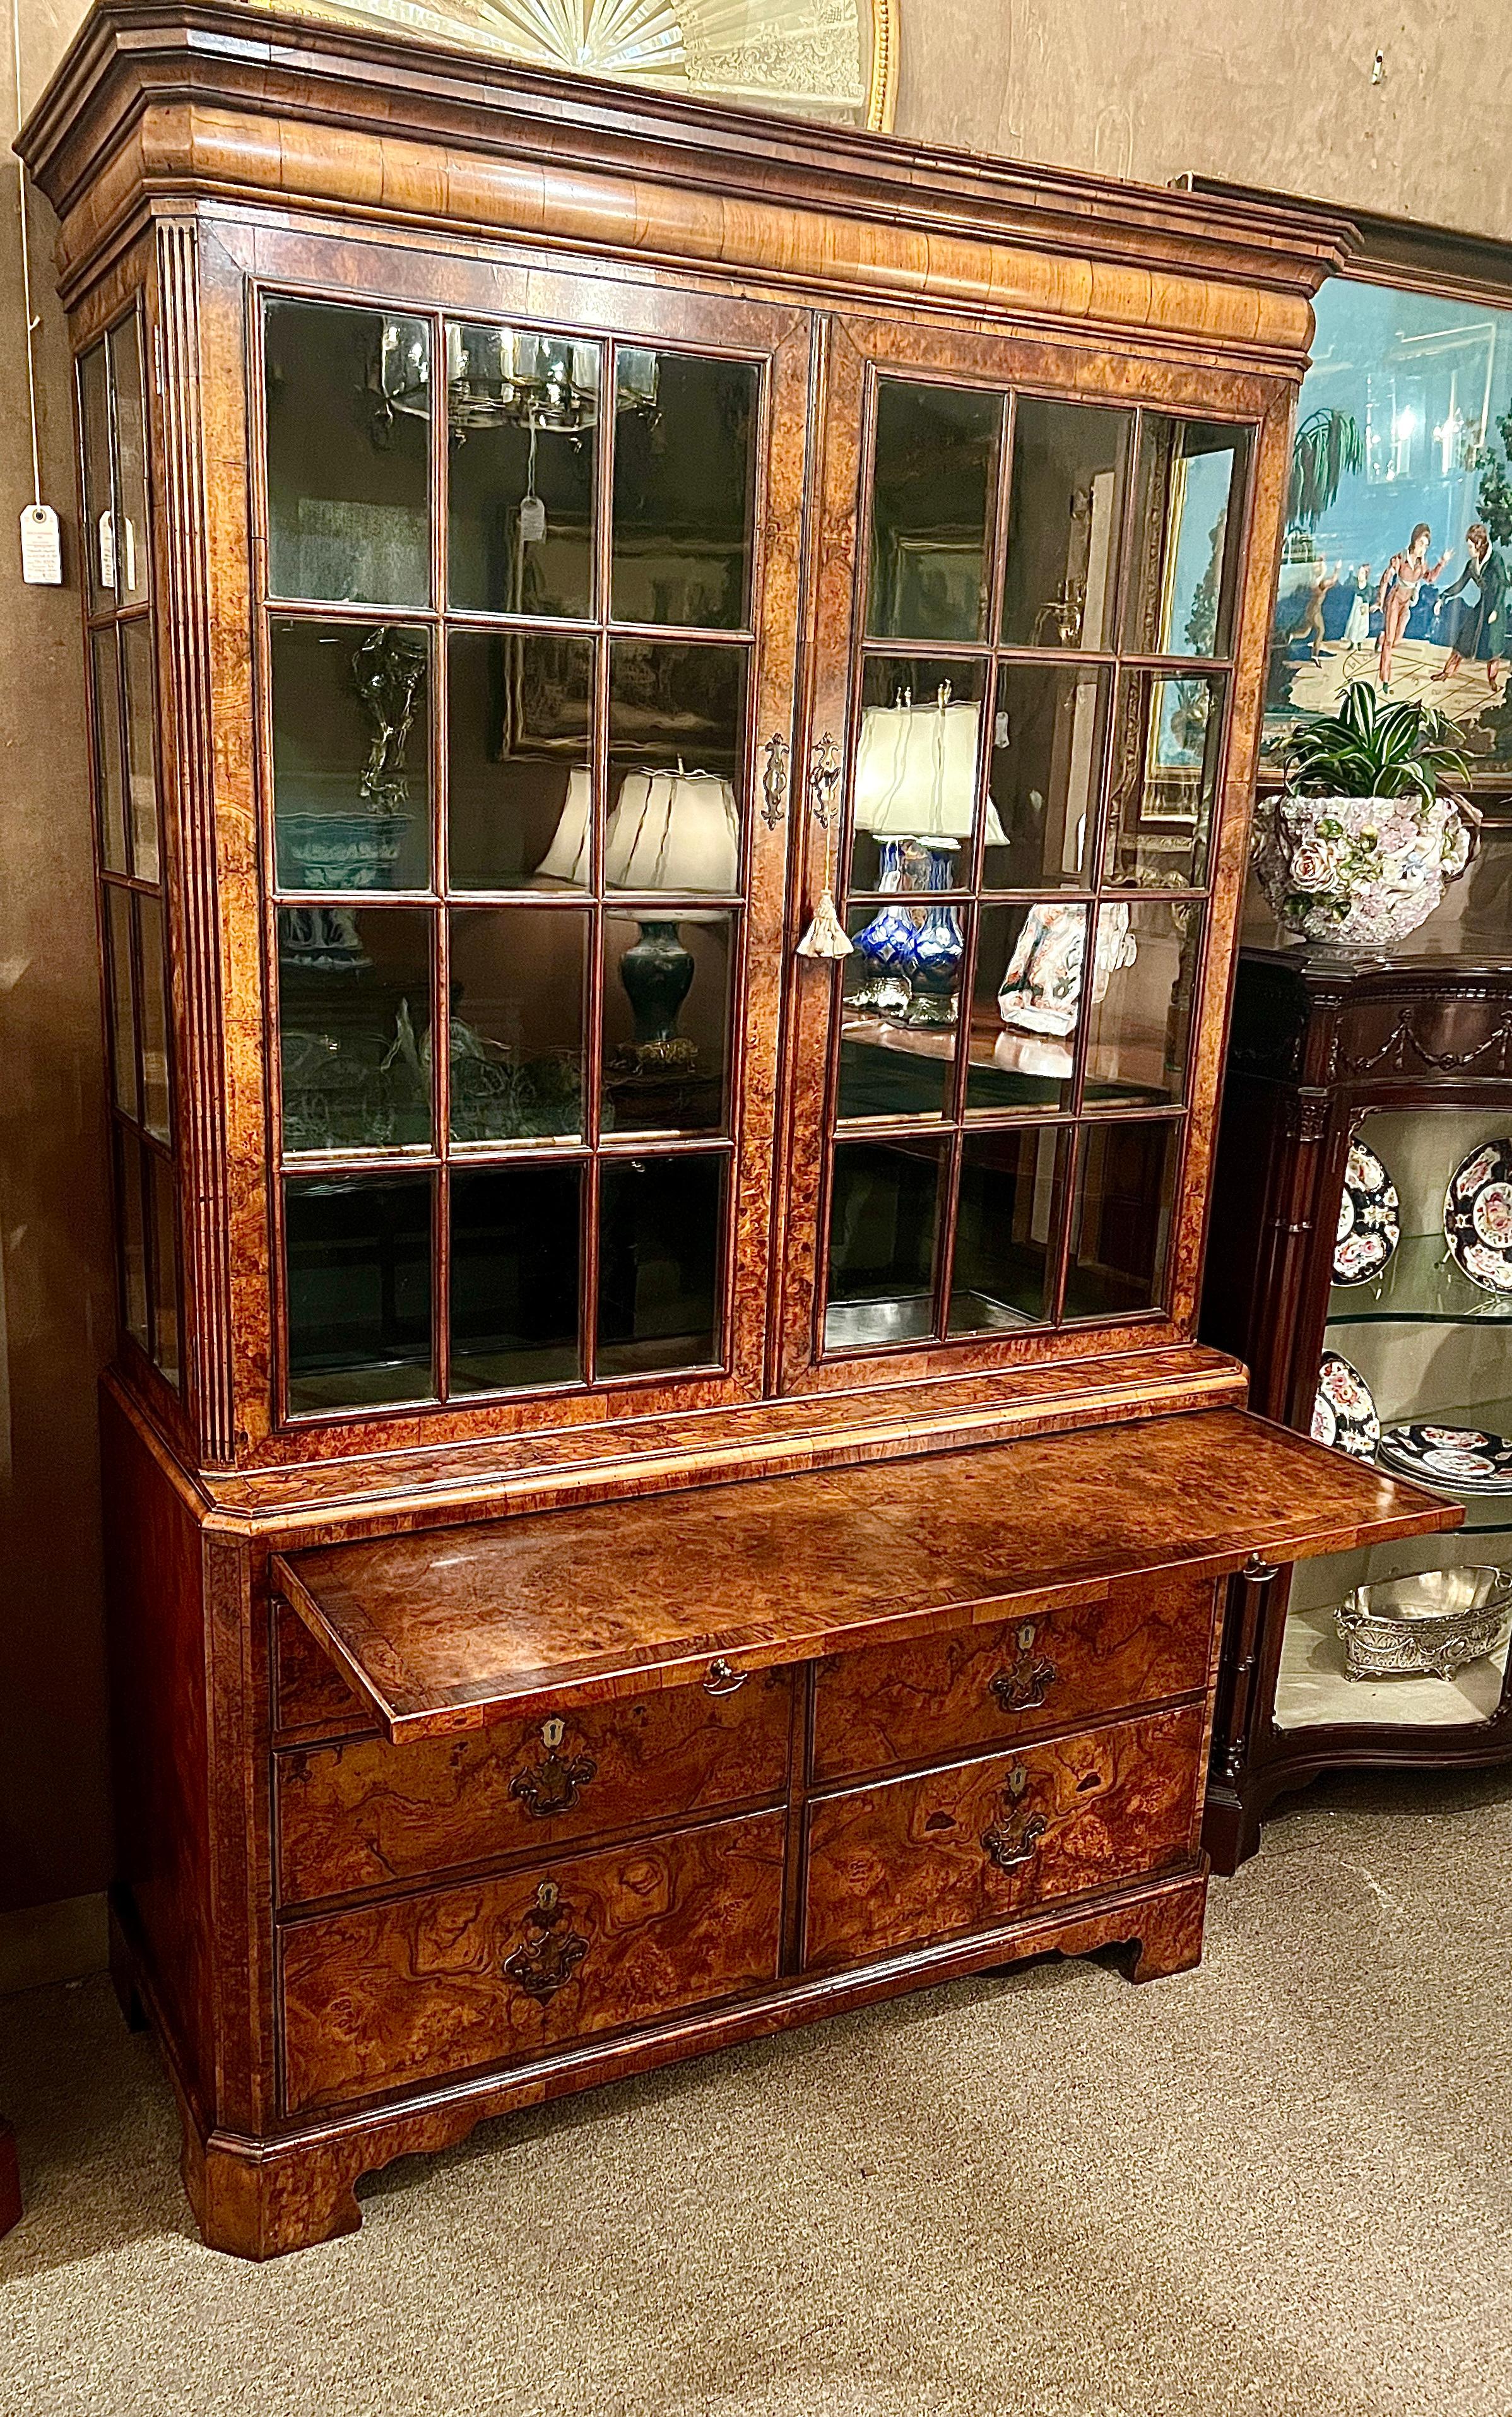 Antique English Burled Walnut Glass Front Cabinet with Writing Slide, Circa 1880 In Good Condition For Sale In New Orleans, LA